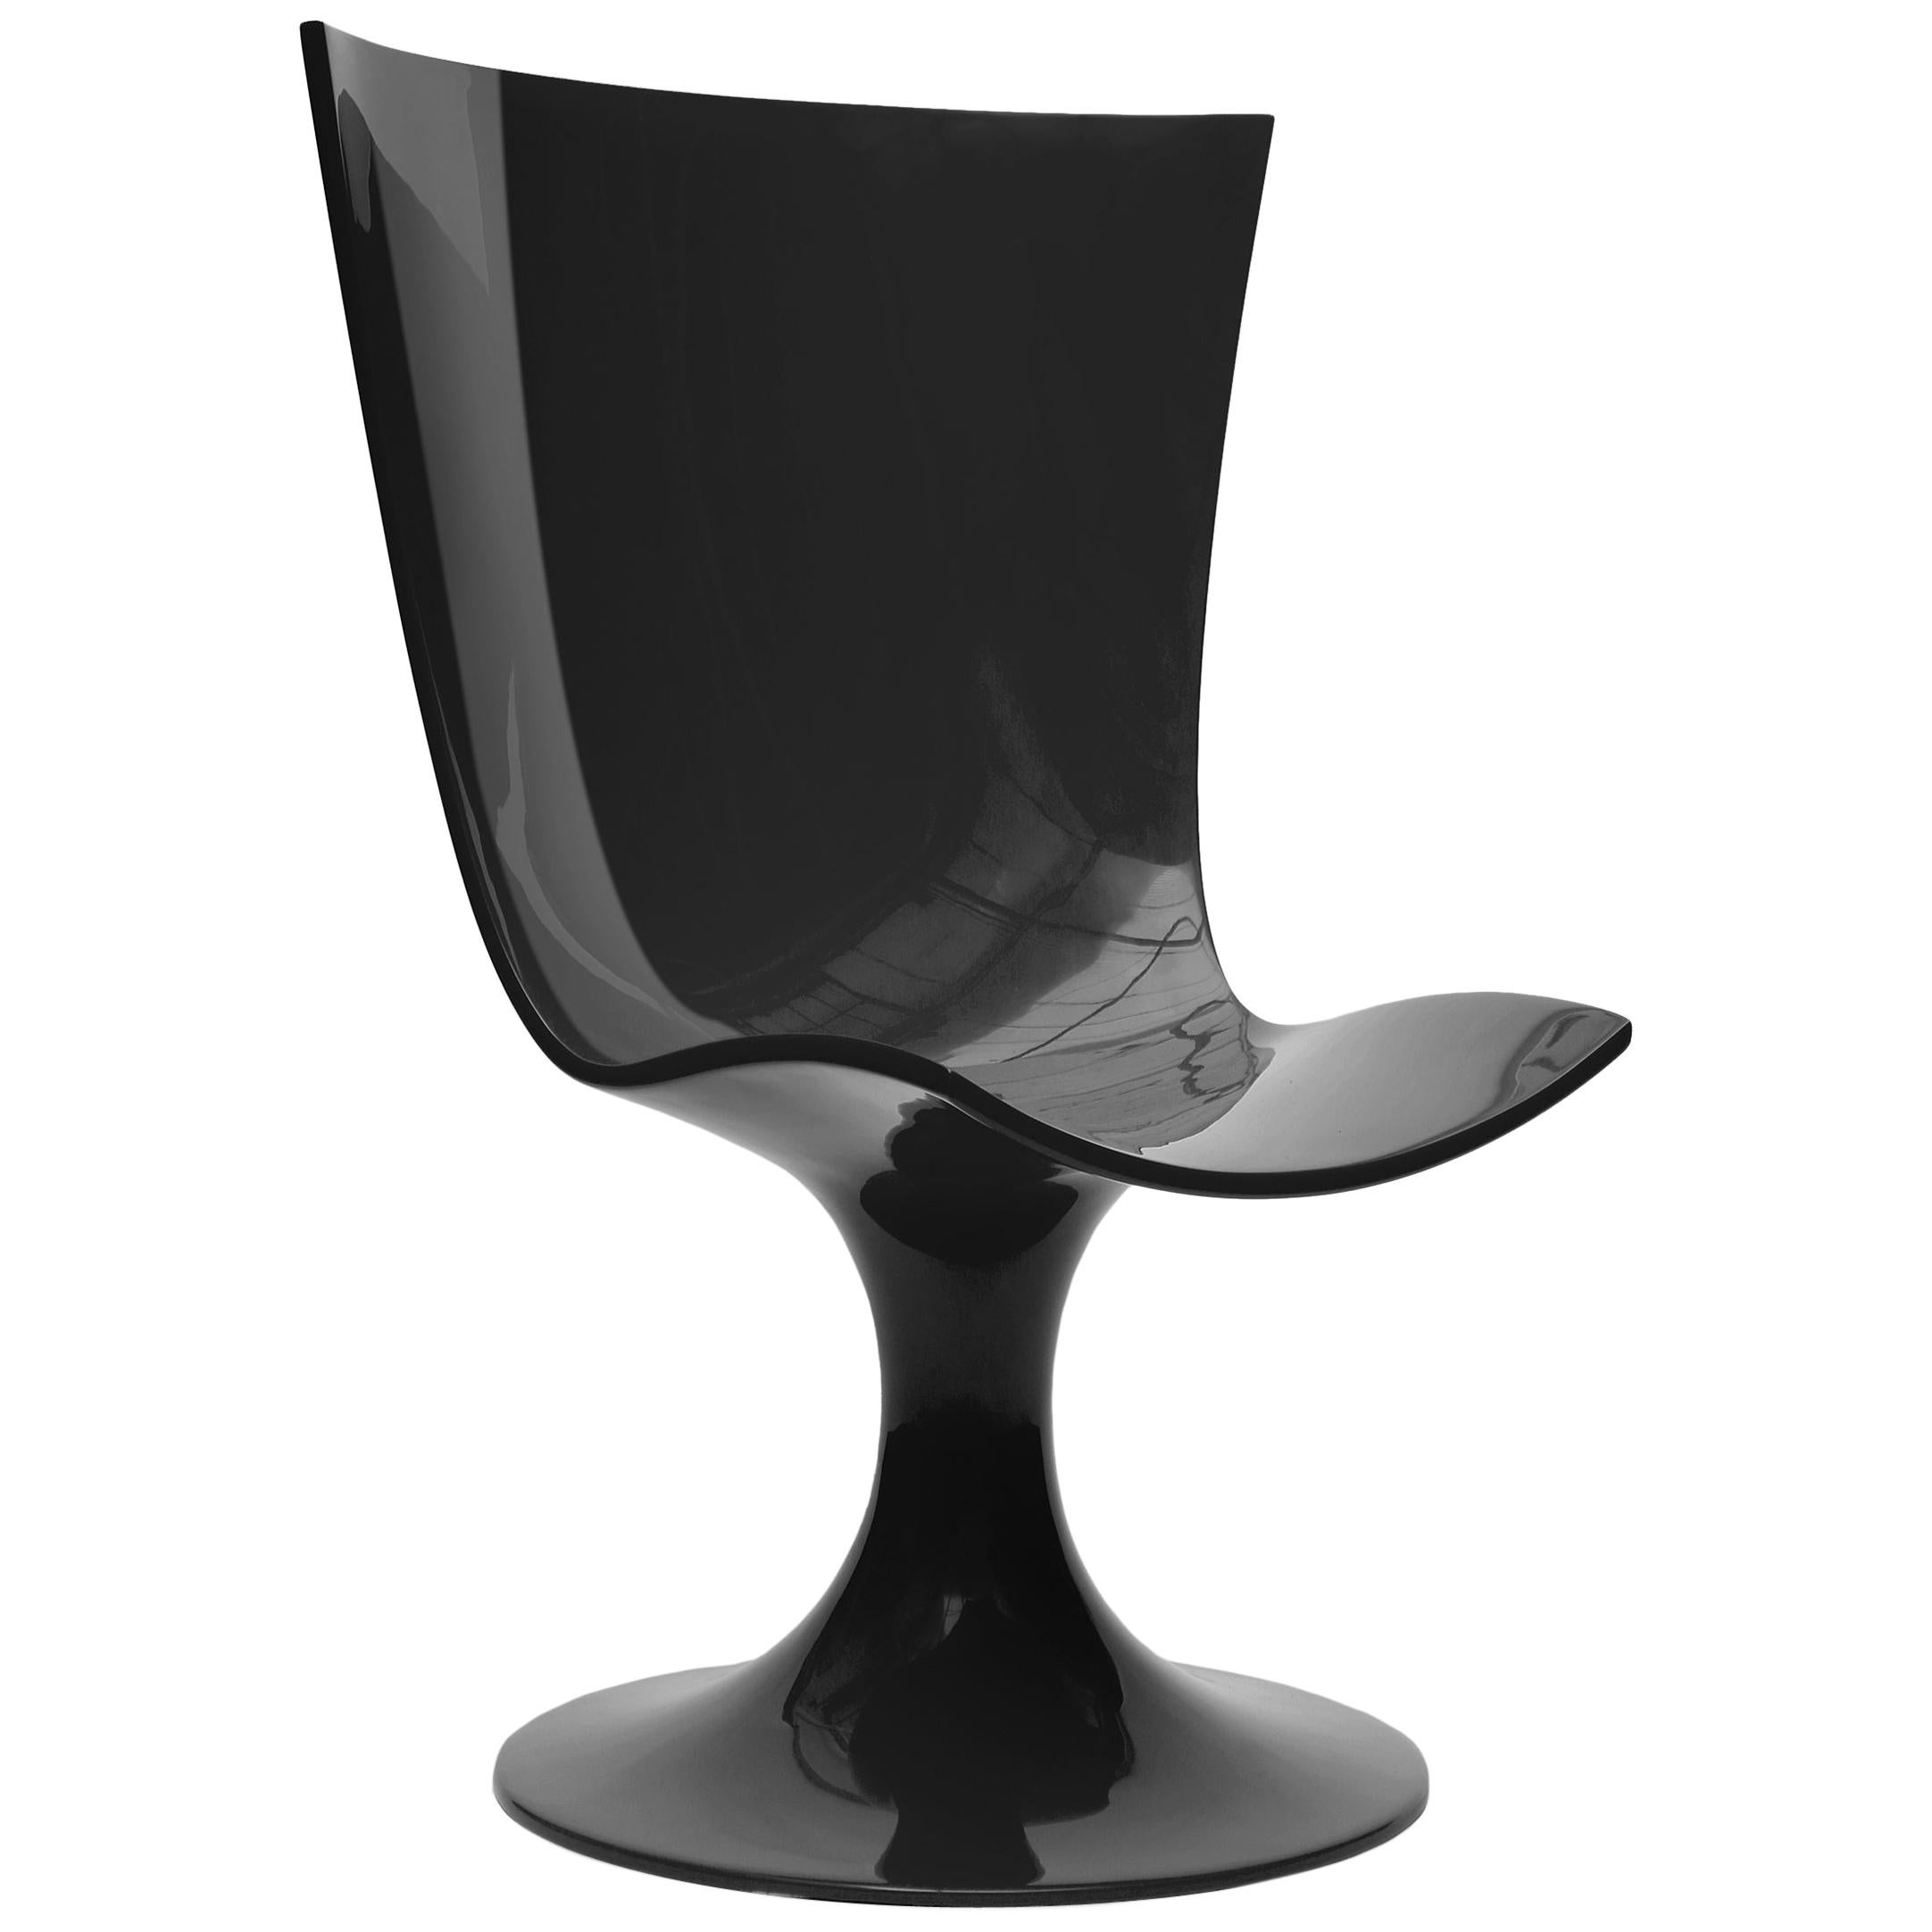 Santos, Imposing Seat, Sculptural Chair in Black by Joel Escalona For Sale